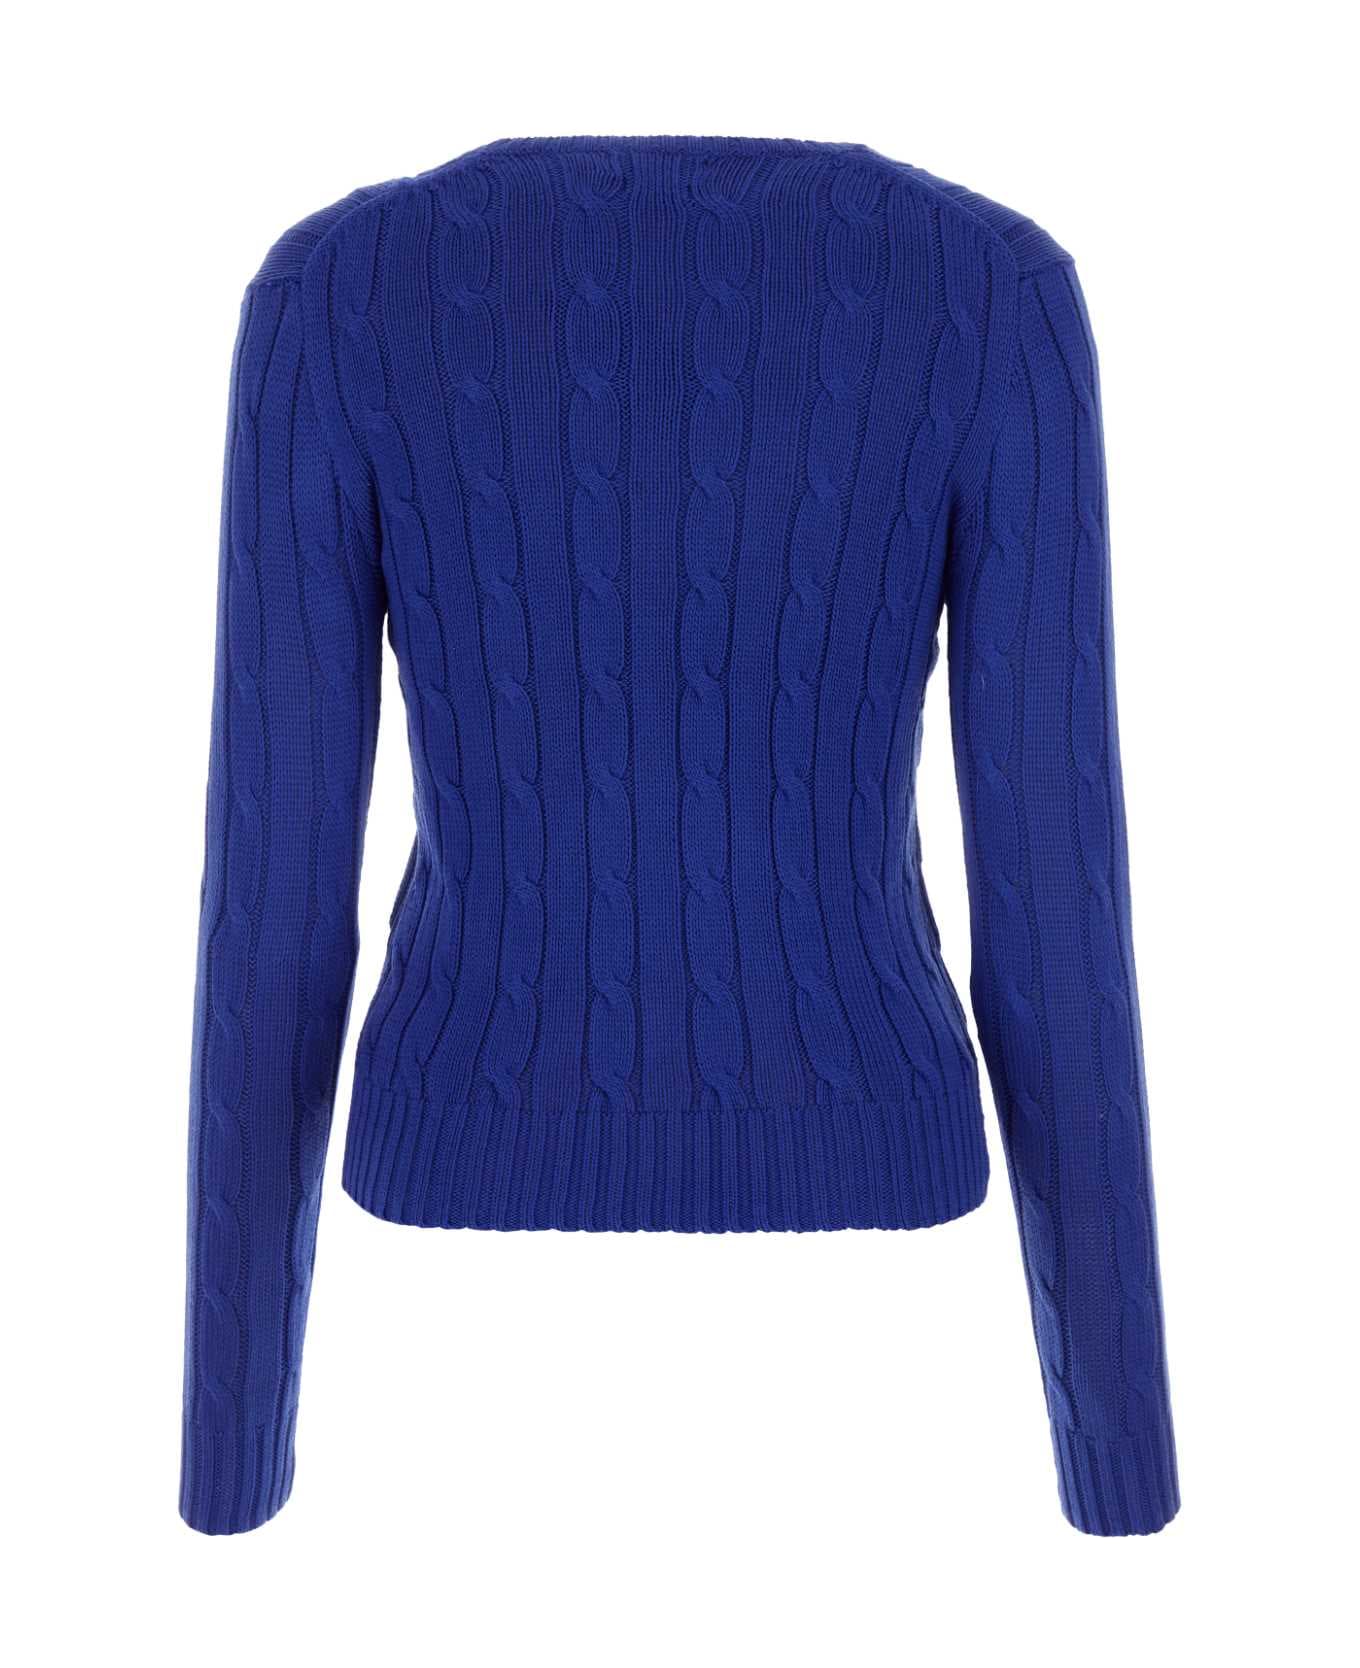 Polo Ralph Lauren Electric Blue Cotton Sweater - RUGBYROYAL ニットウェア